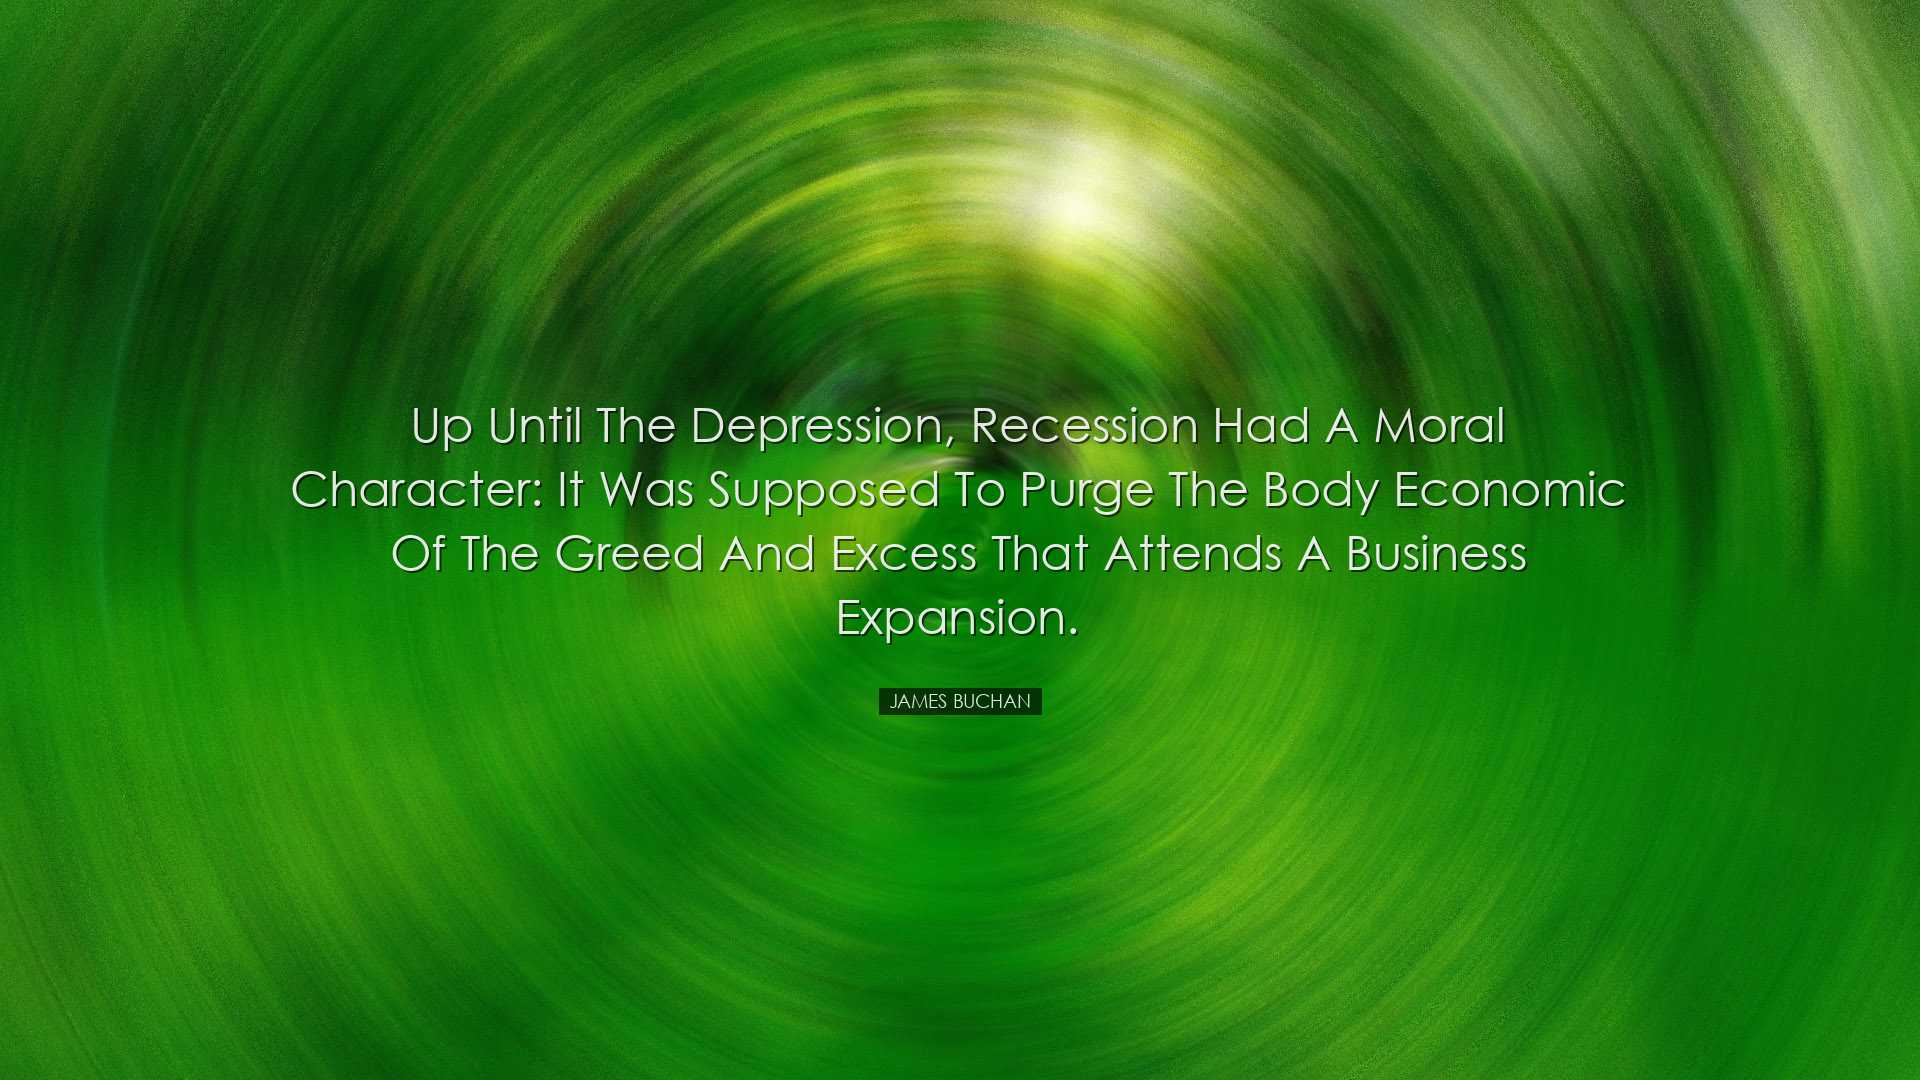 Up until the Depression, recession had a moral character: it was s